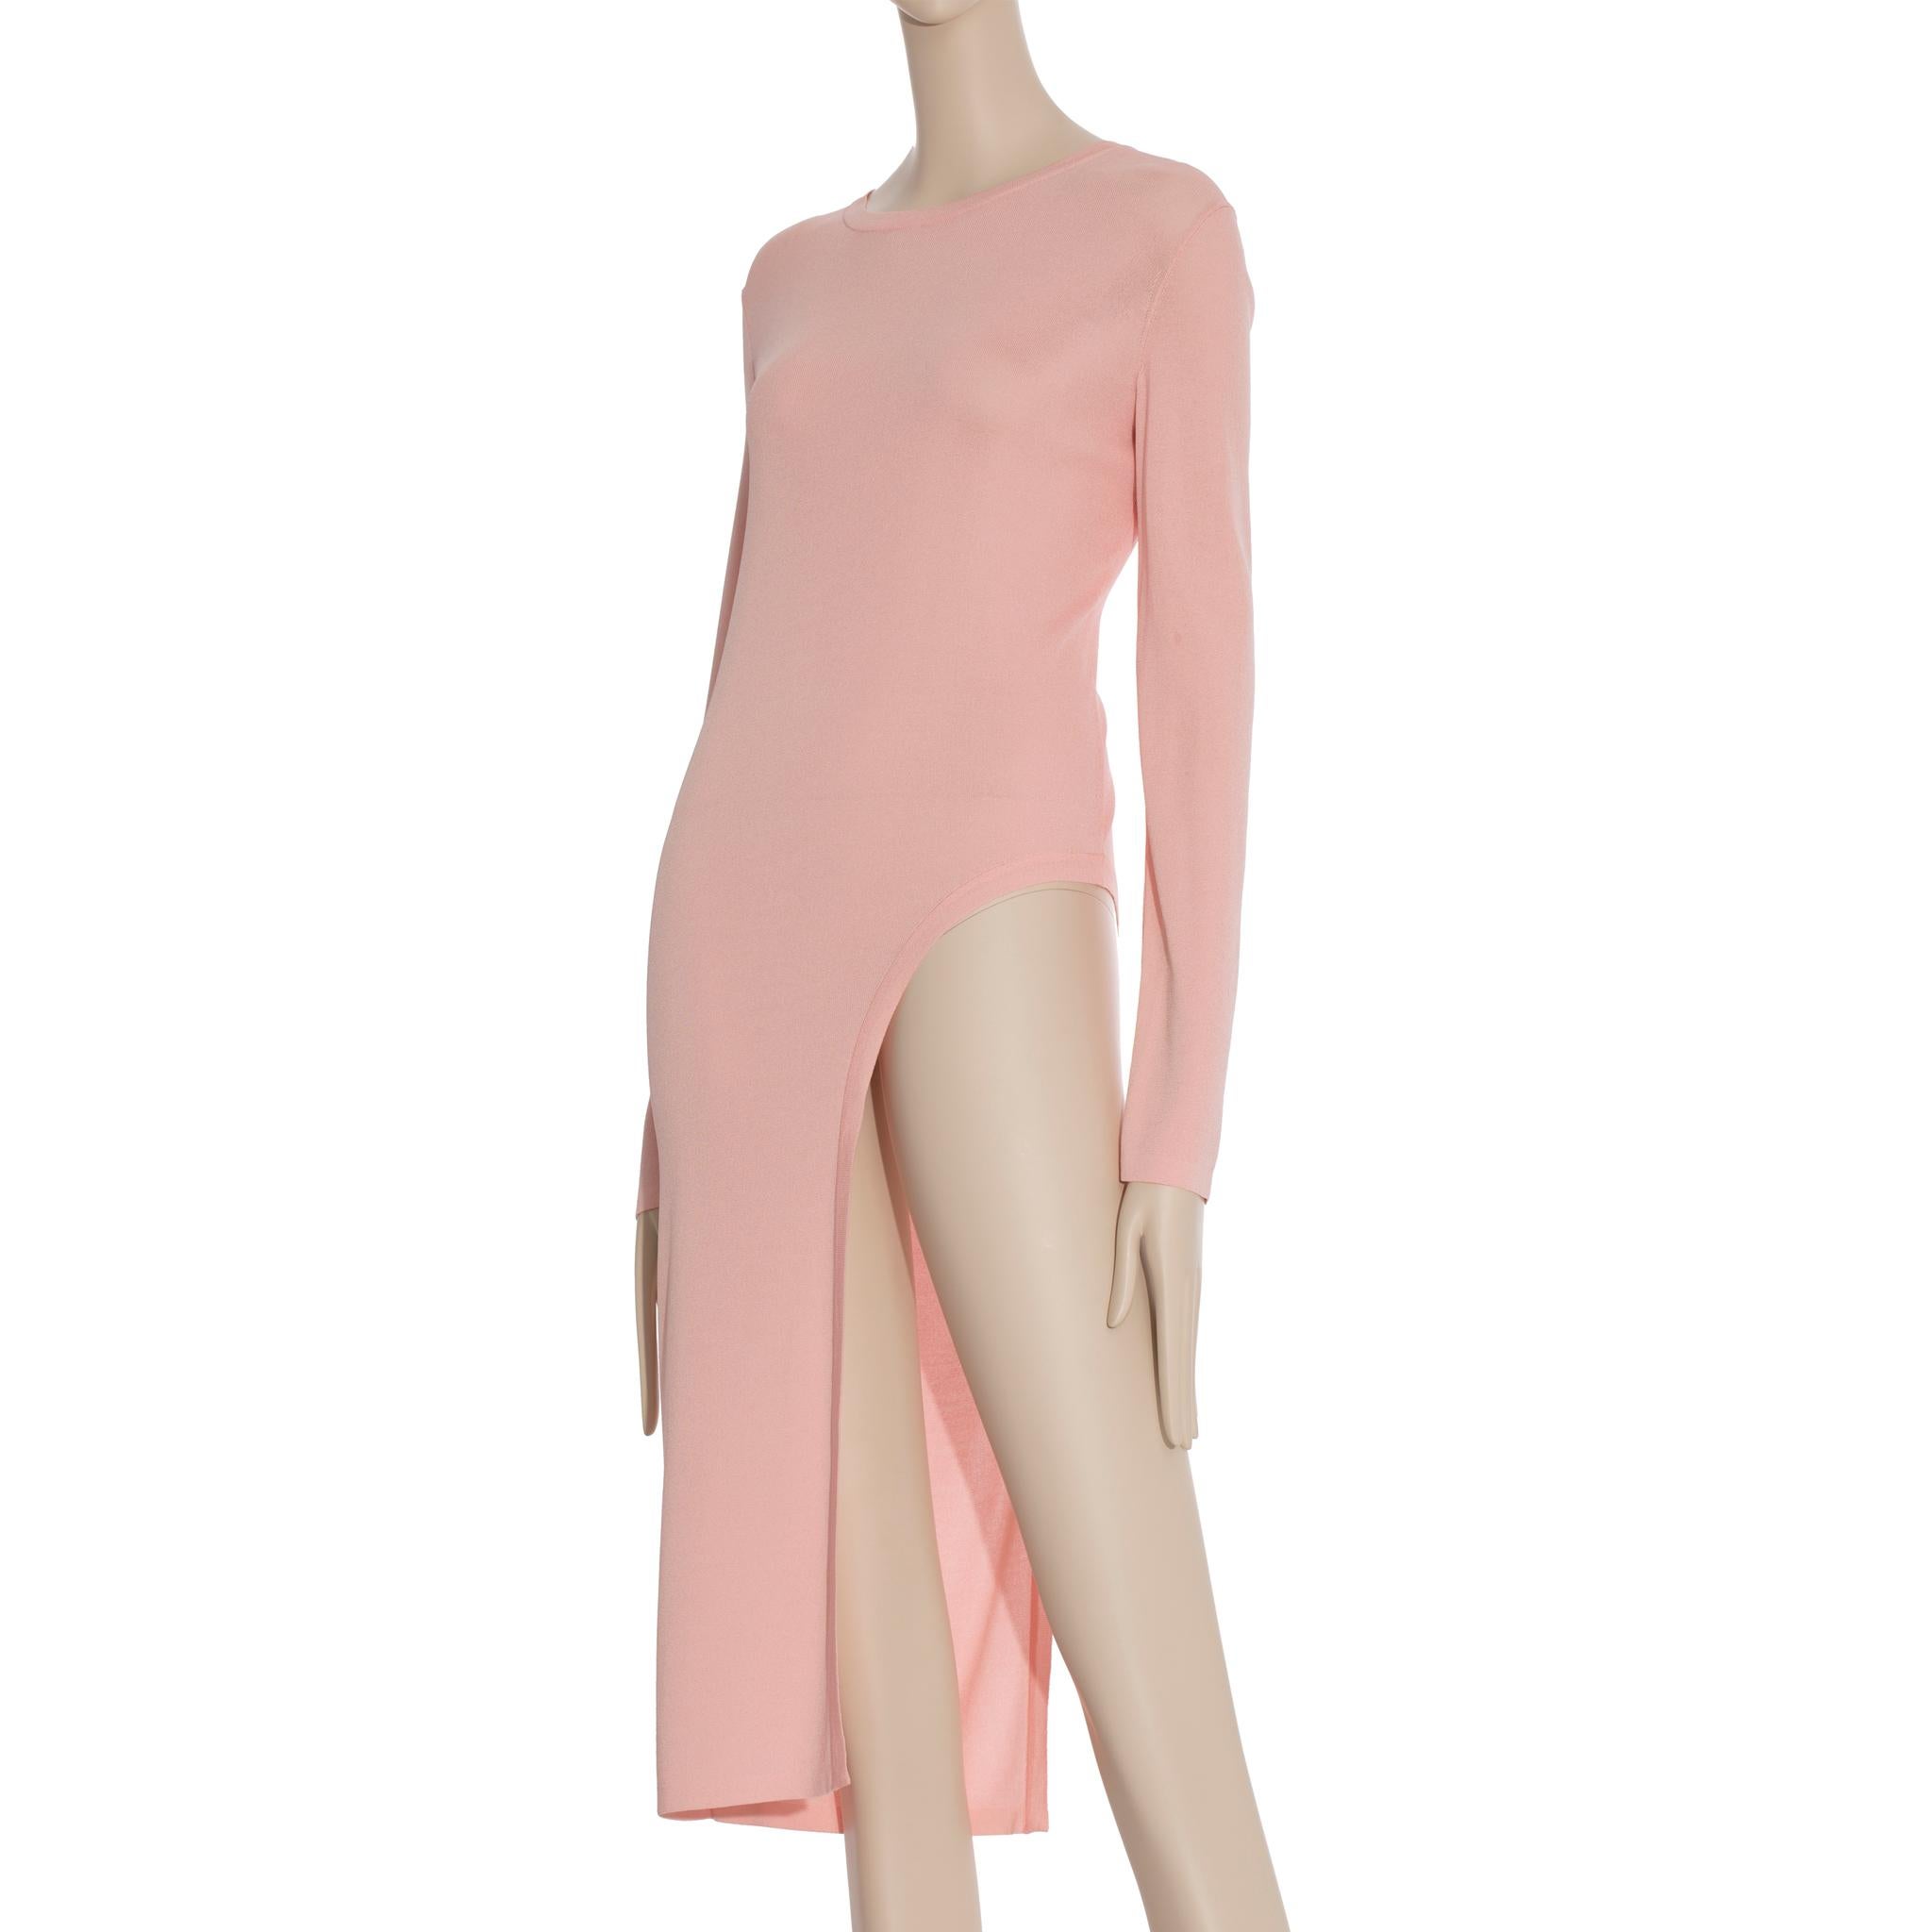 This stylish Chanel Knit Pink Long Sleeve Dress/Top is perfect for the summer season. Its light and breathable fabric is ideal for beach days, while its classic design and comfortable fit make it suitable for almost any